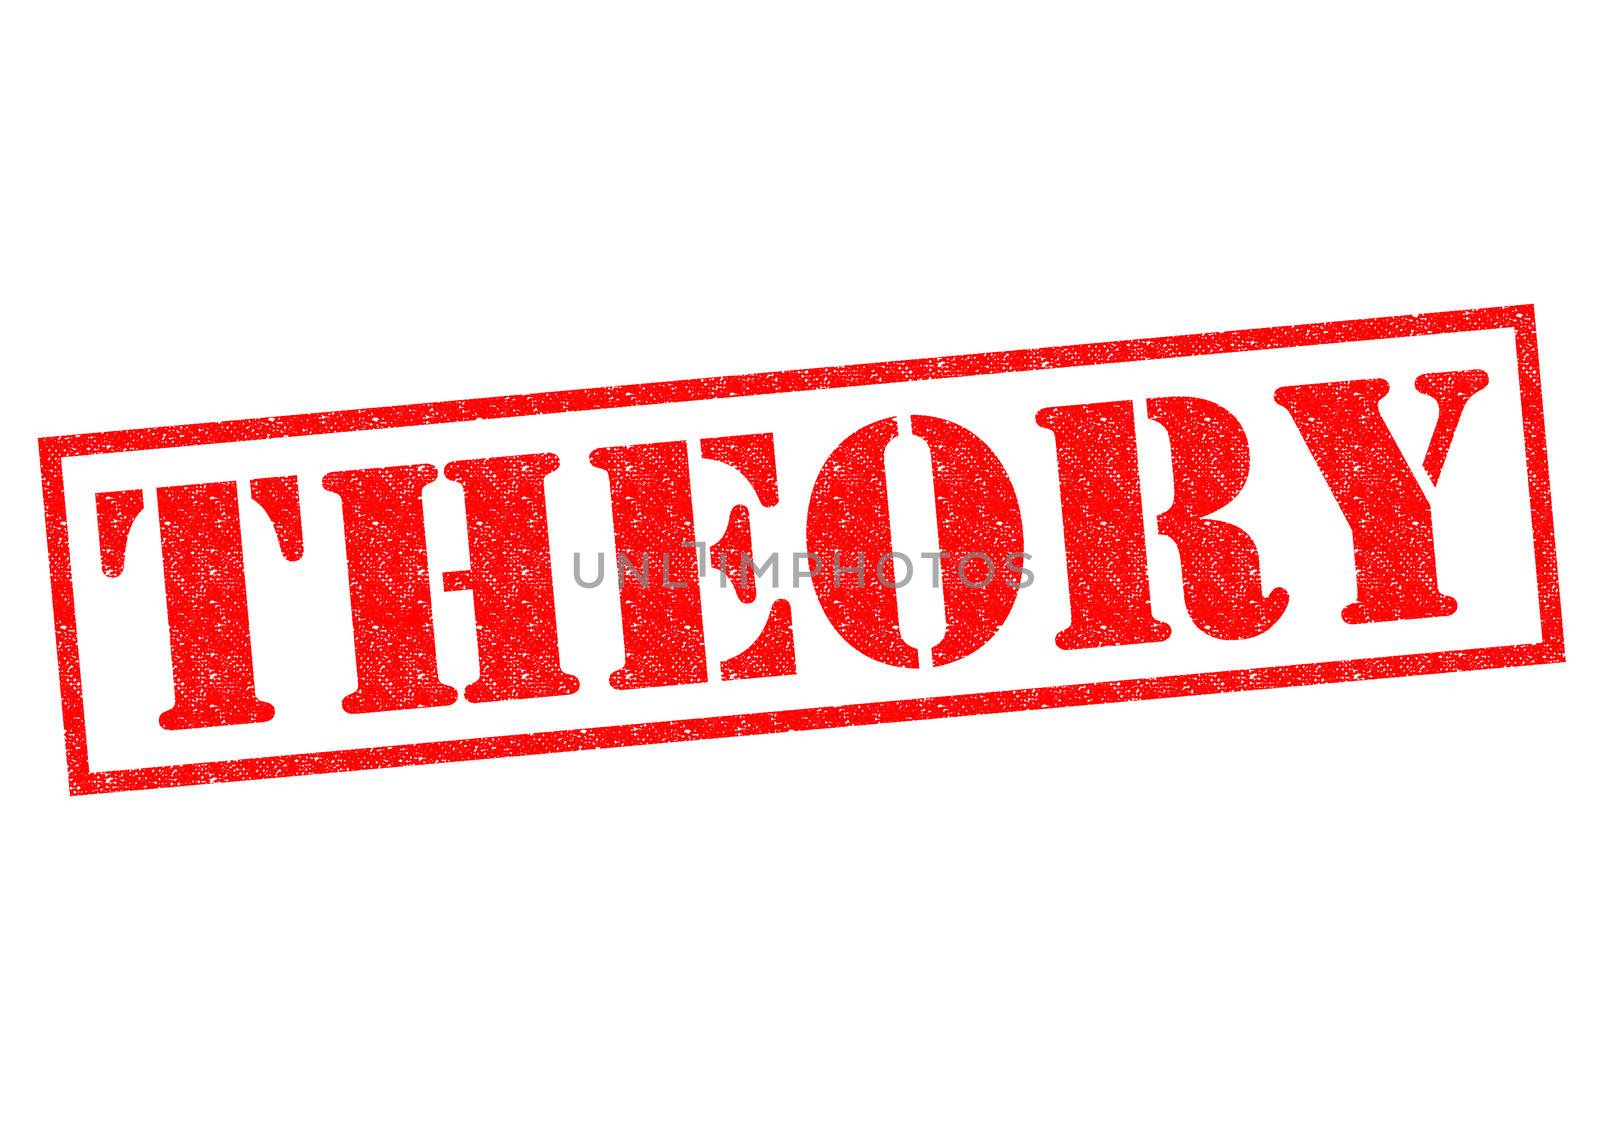 THEORY red Rubber Stamp over a white background.